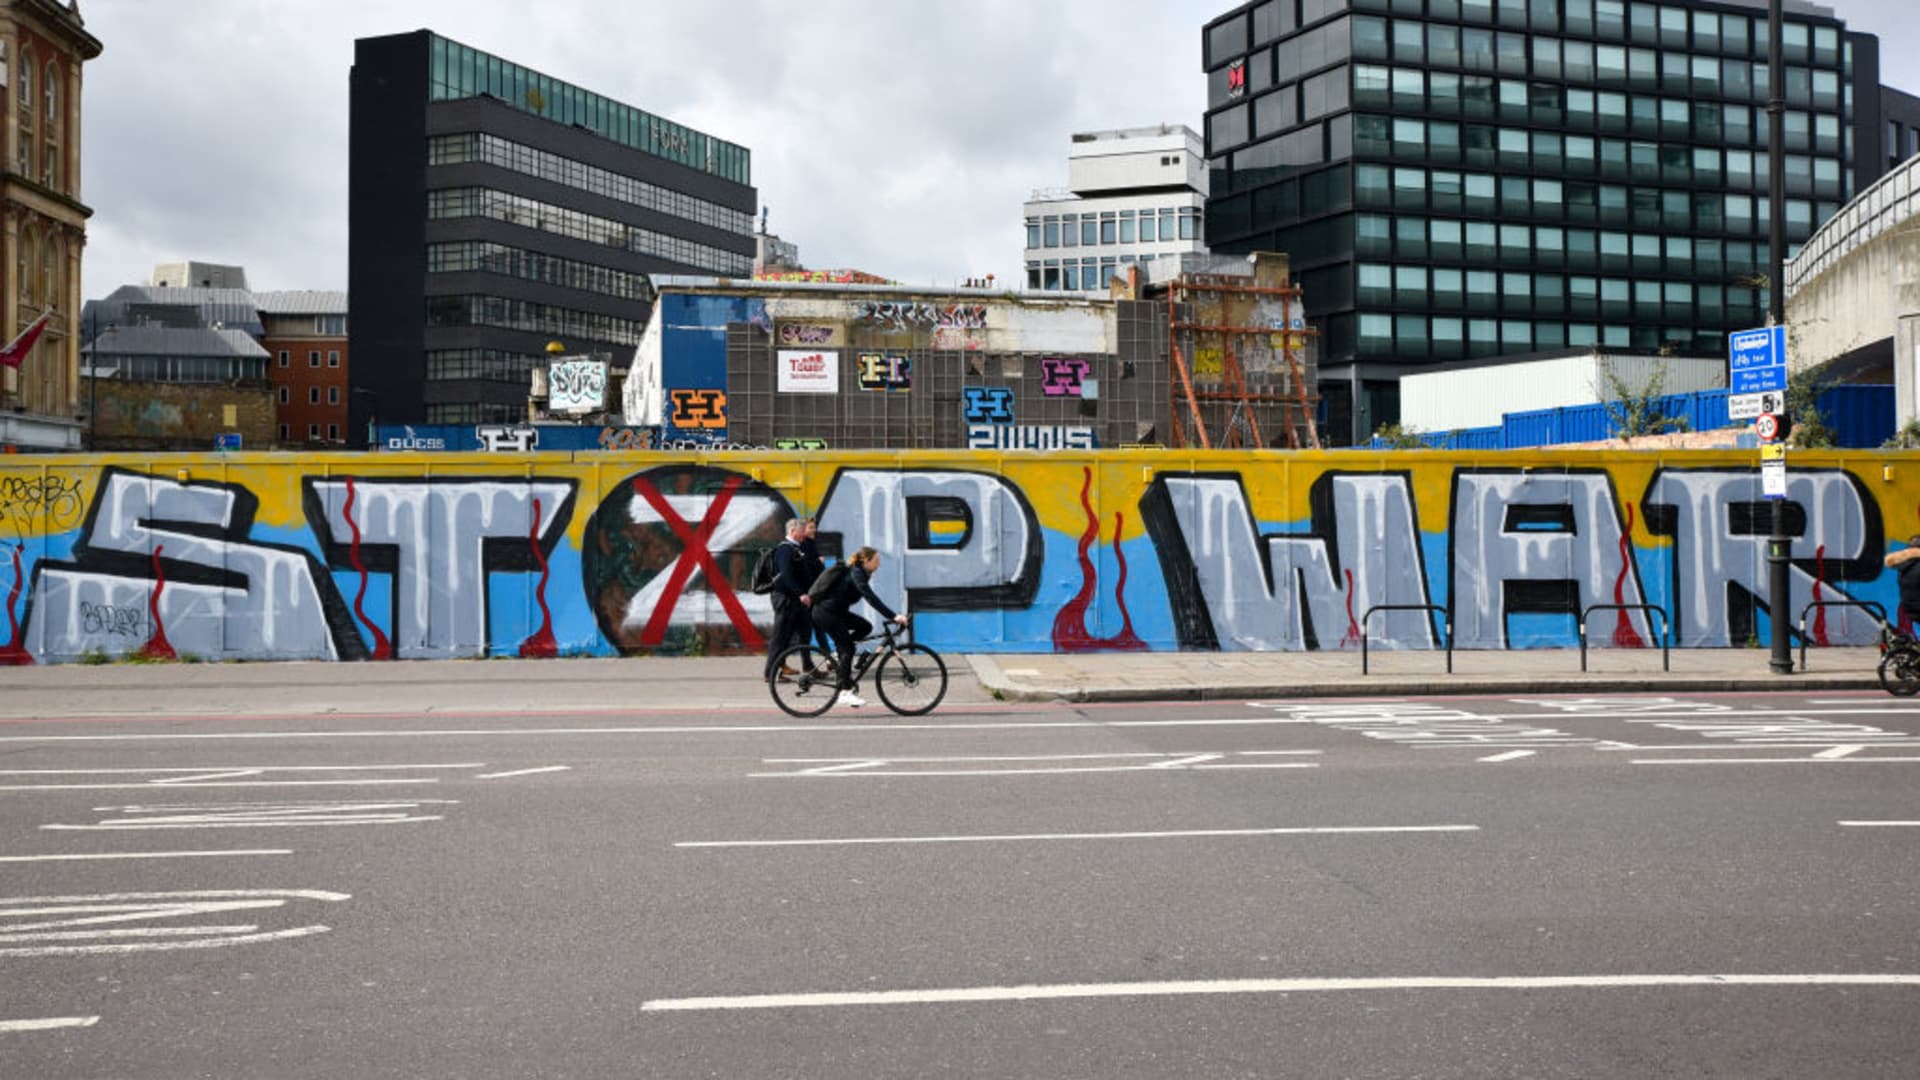 Stop the War and the pro Russian 'Z' with a cross through it, solidarity with Ukraine graffiti in Shoreditch, London.